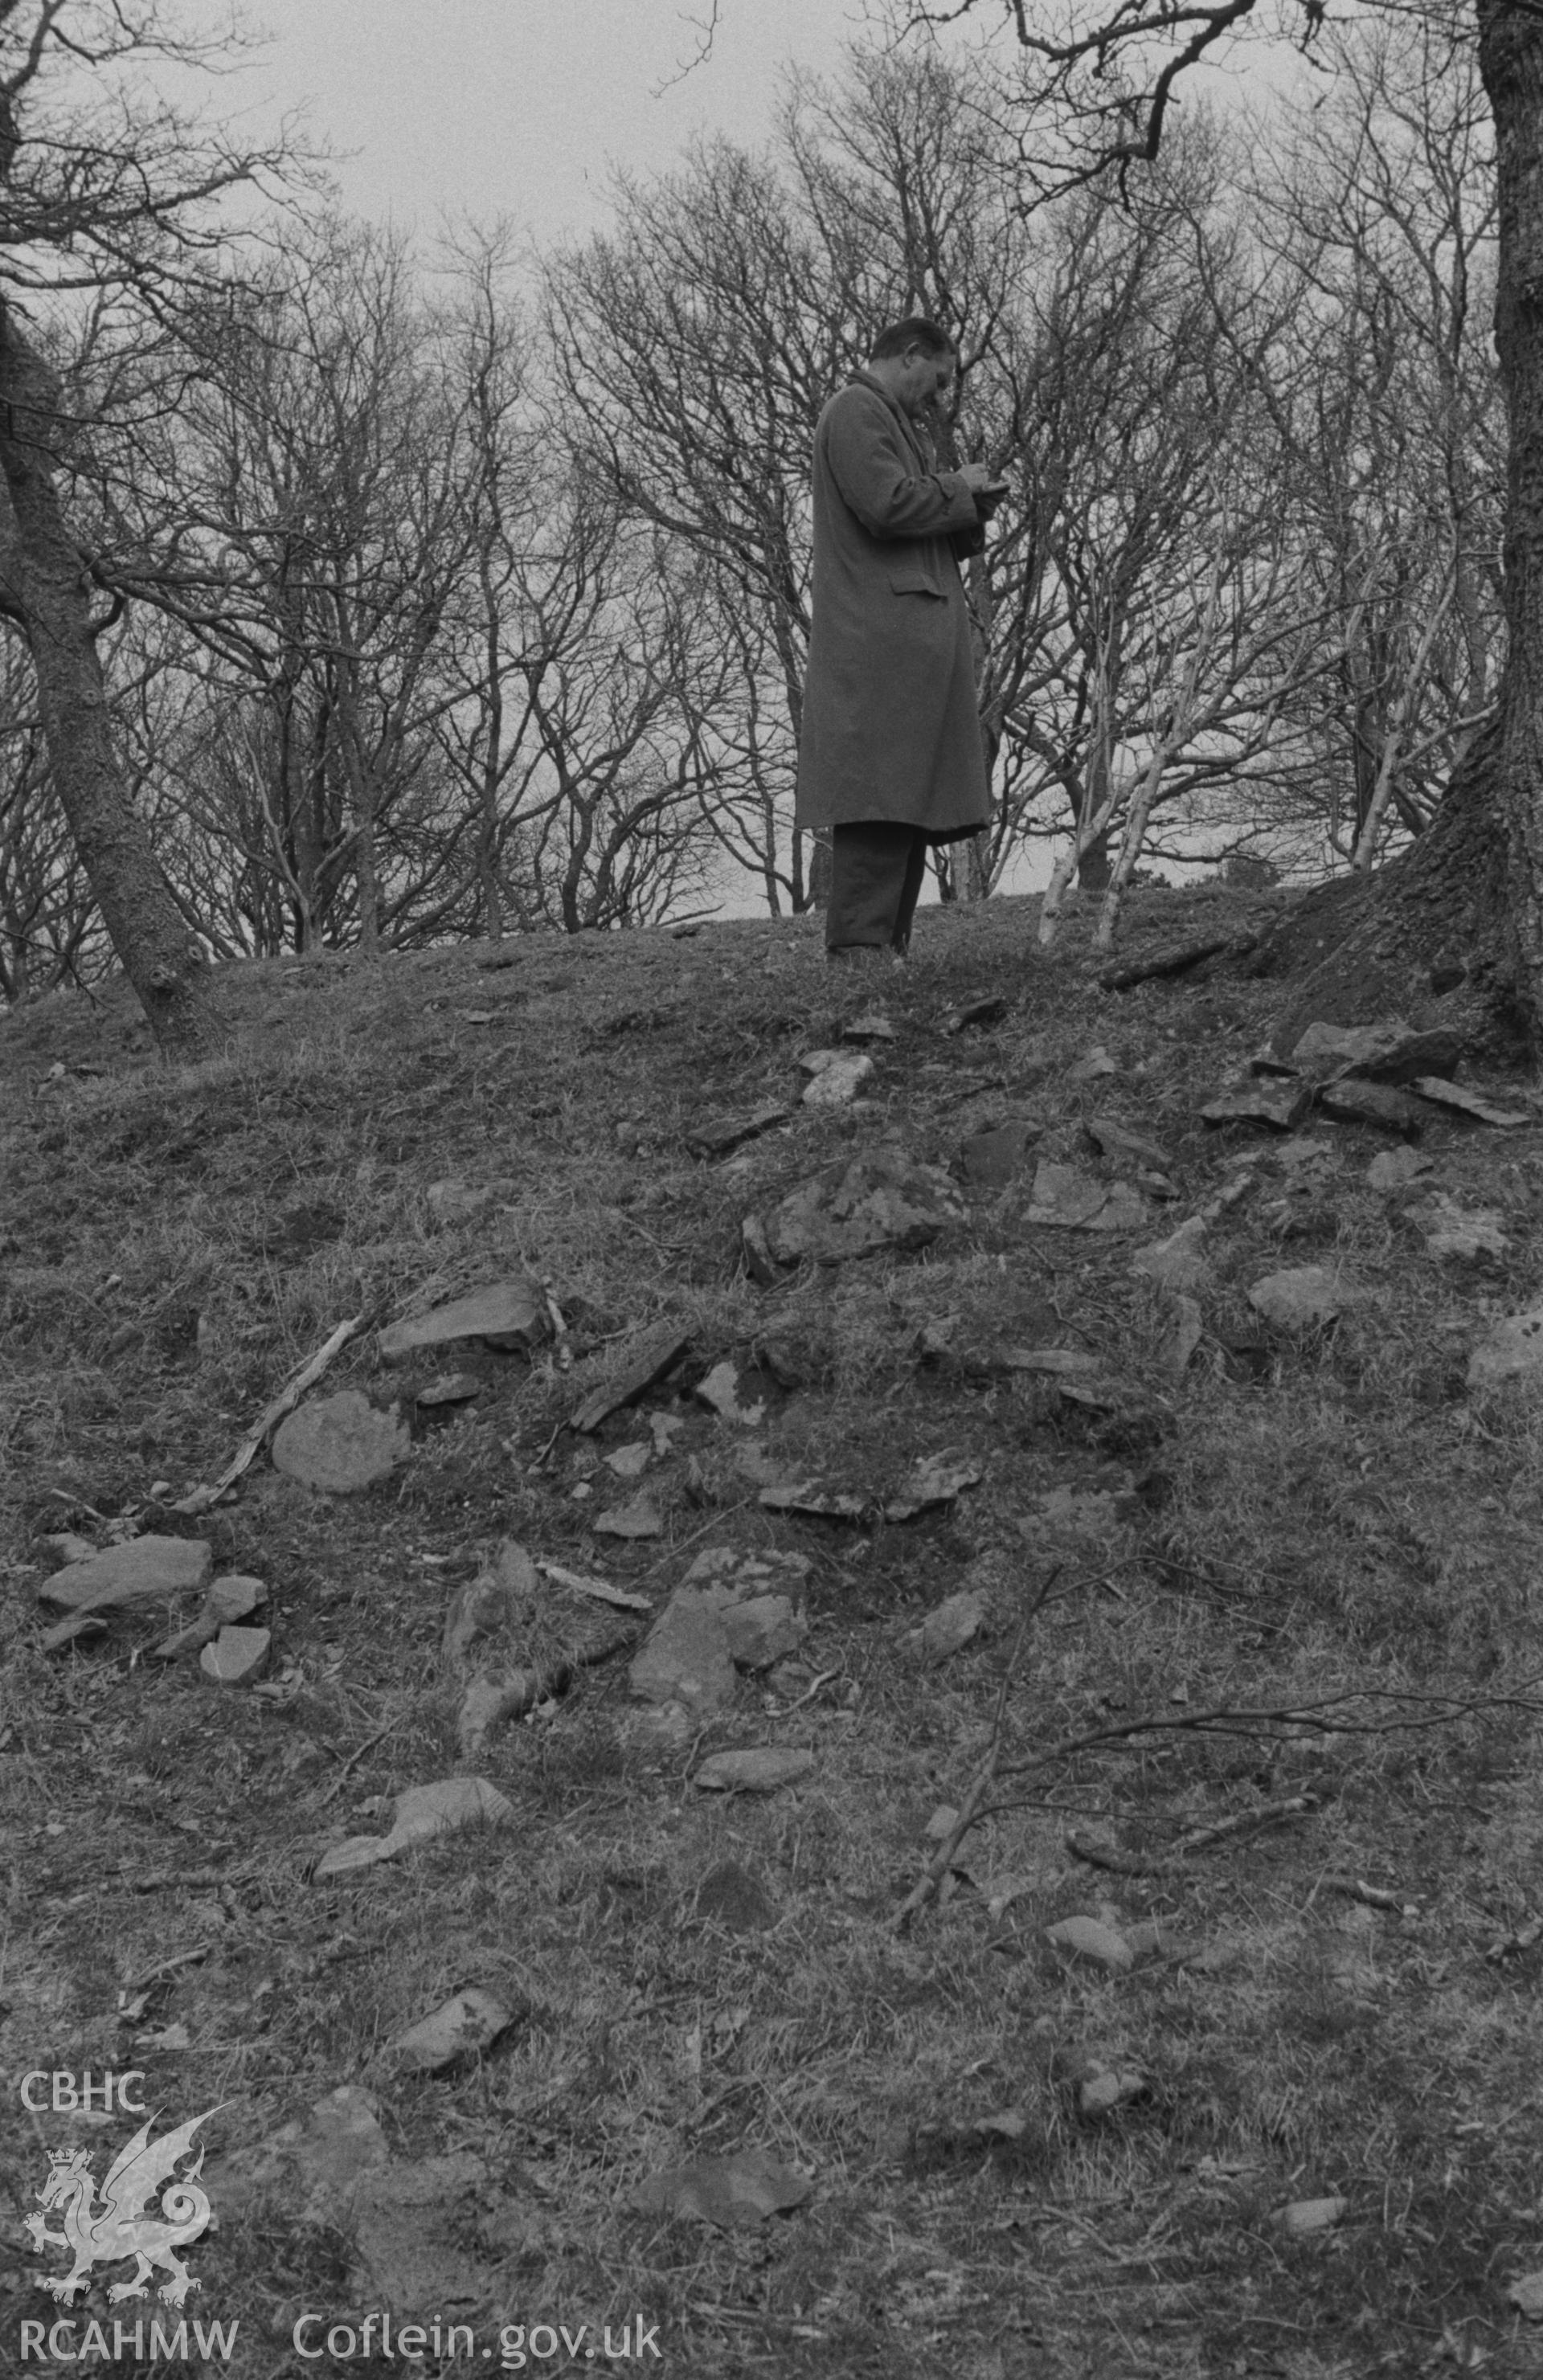 Digital copy of a black and white negative showing figure at Craig Gwytheyrn hillfort. Photographed by Arthur O. Chater in April 1967.